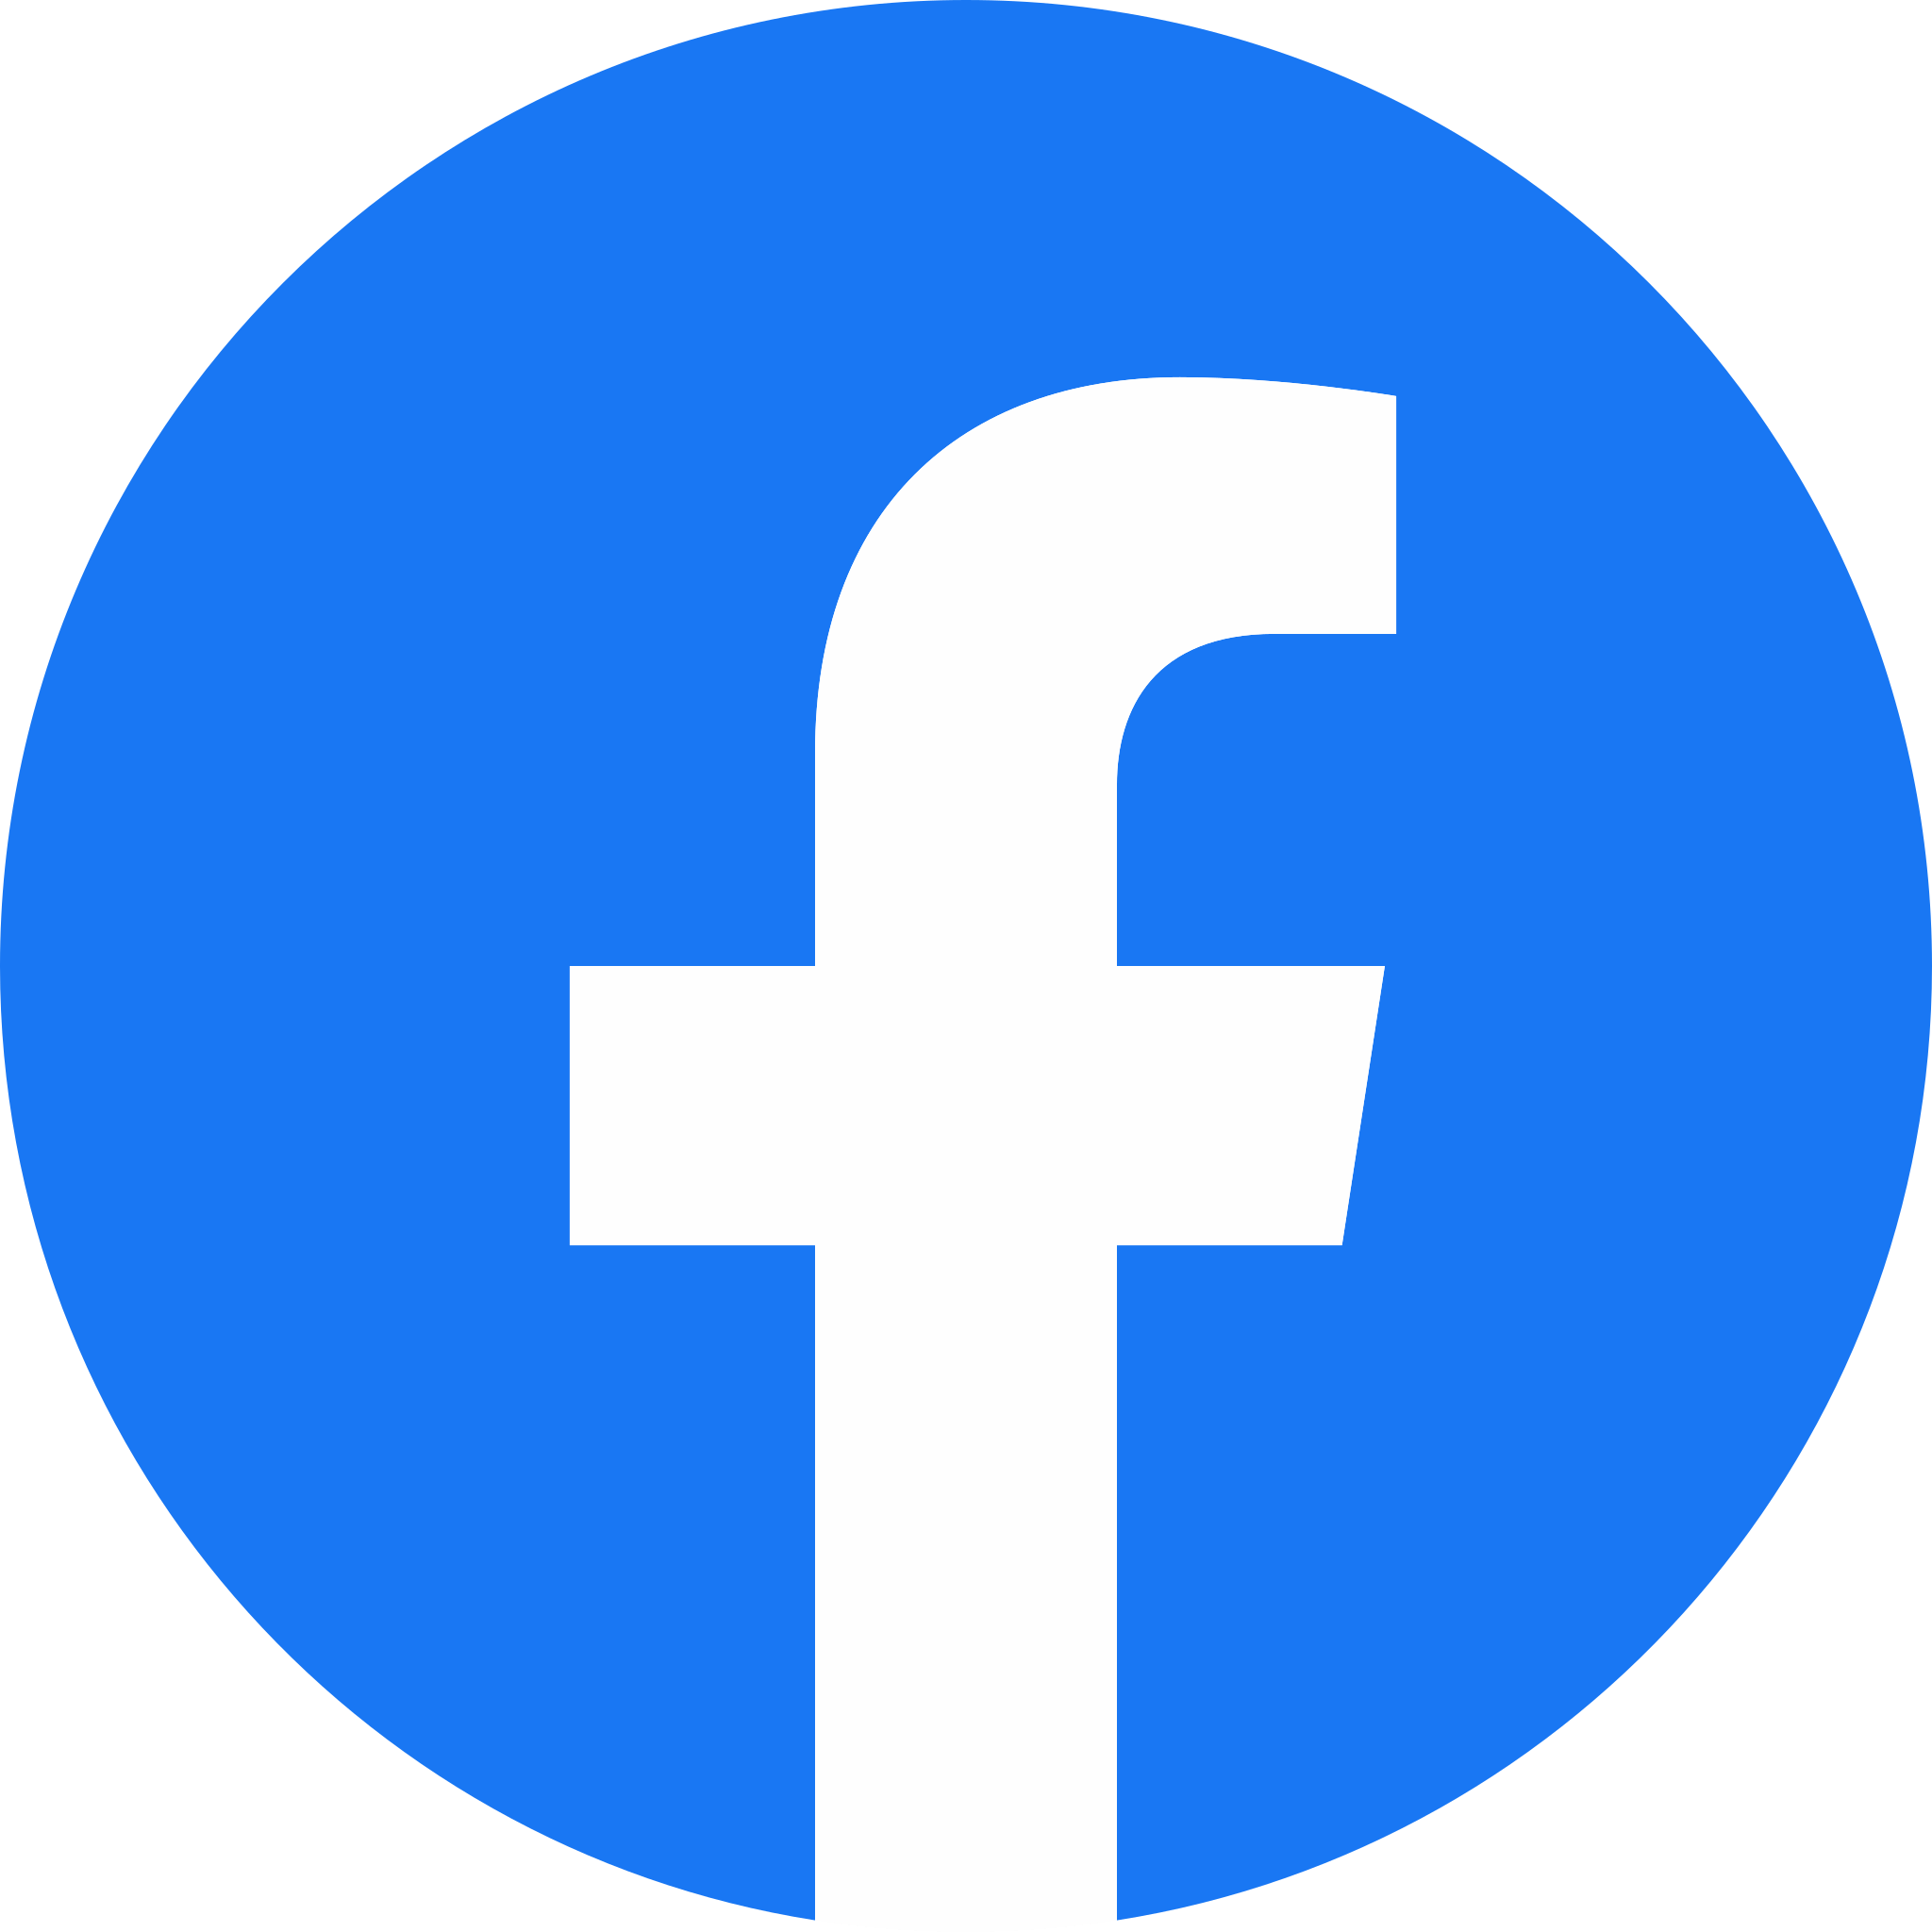 File:Facebook f logo (2019).svg - Wikimedia Commons